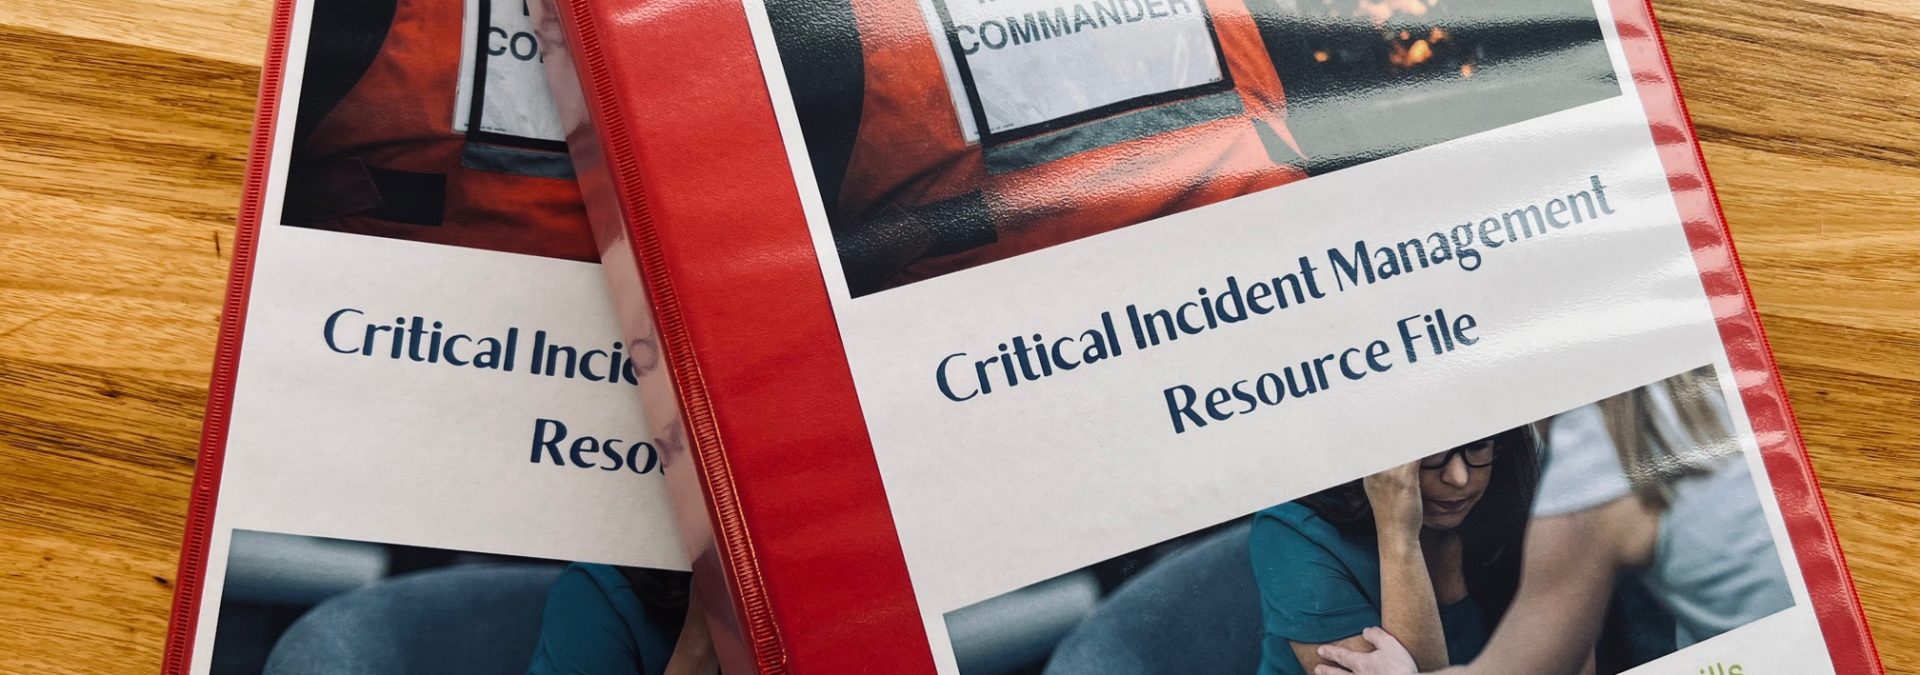 We now have a Critical Incident Management Plan